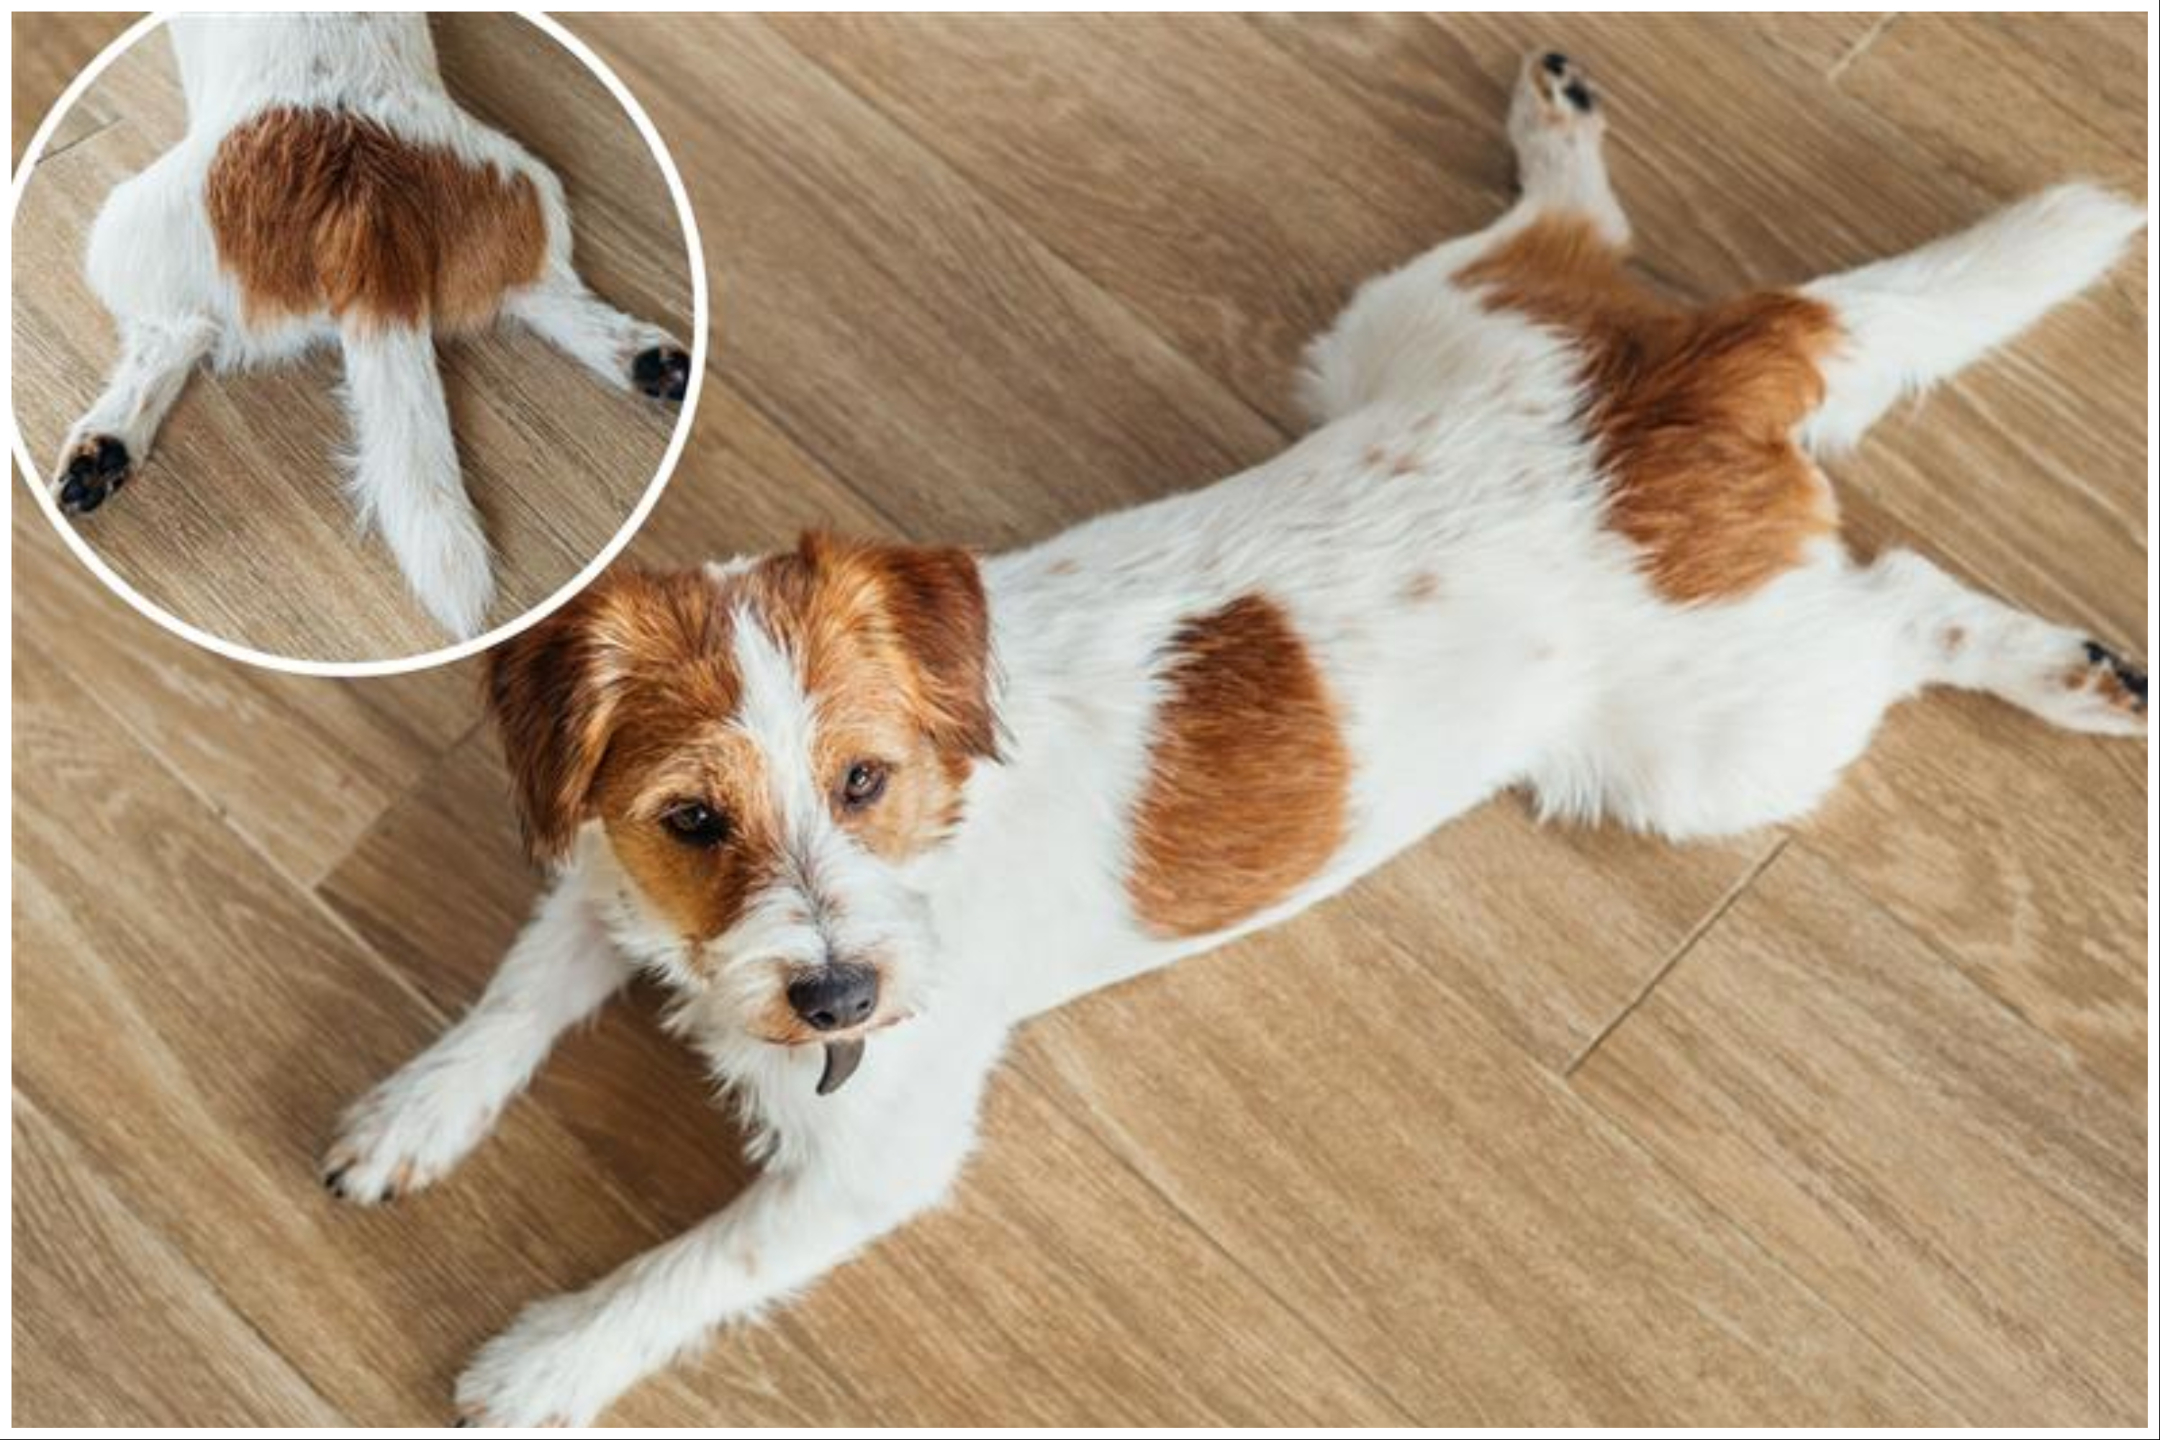 Hearts Melt as Jack Russell Performs 'Ballerina' Stretch With Her Tiny Legs